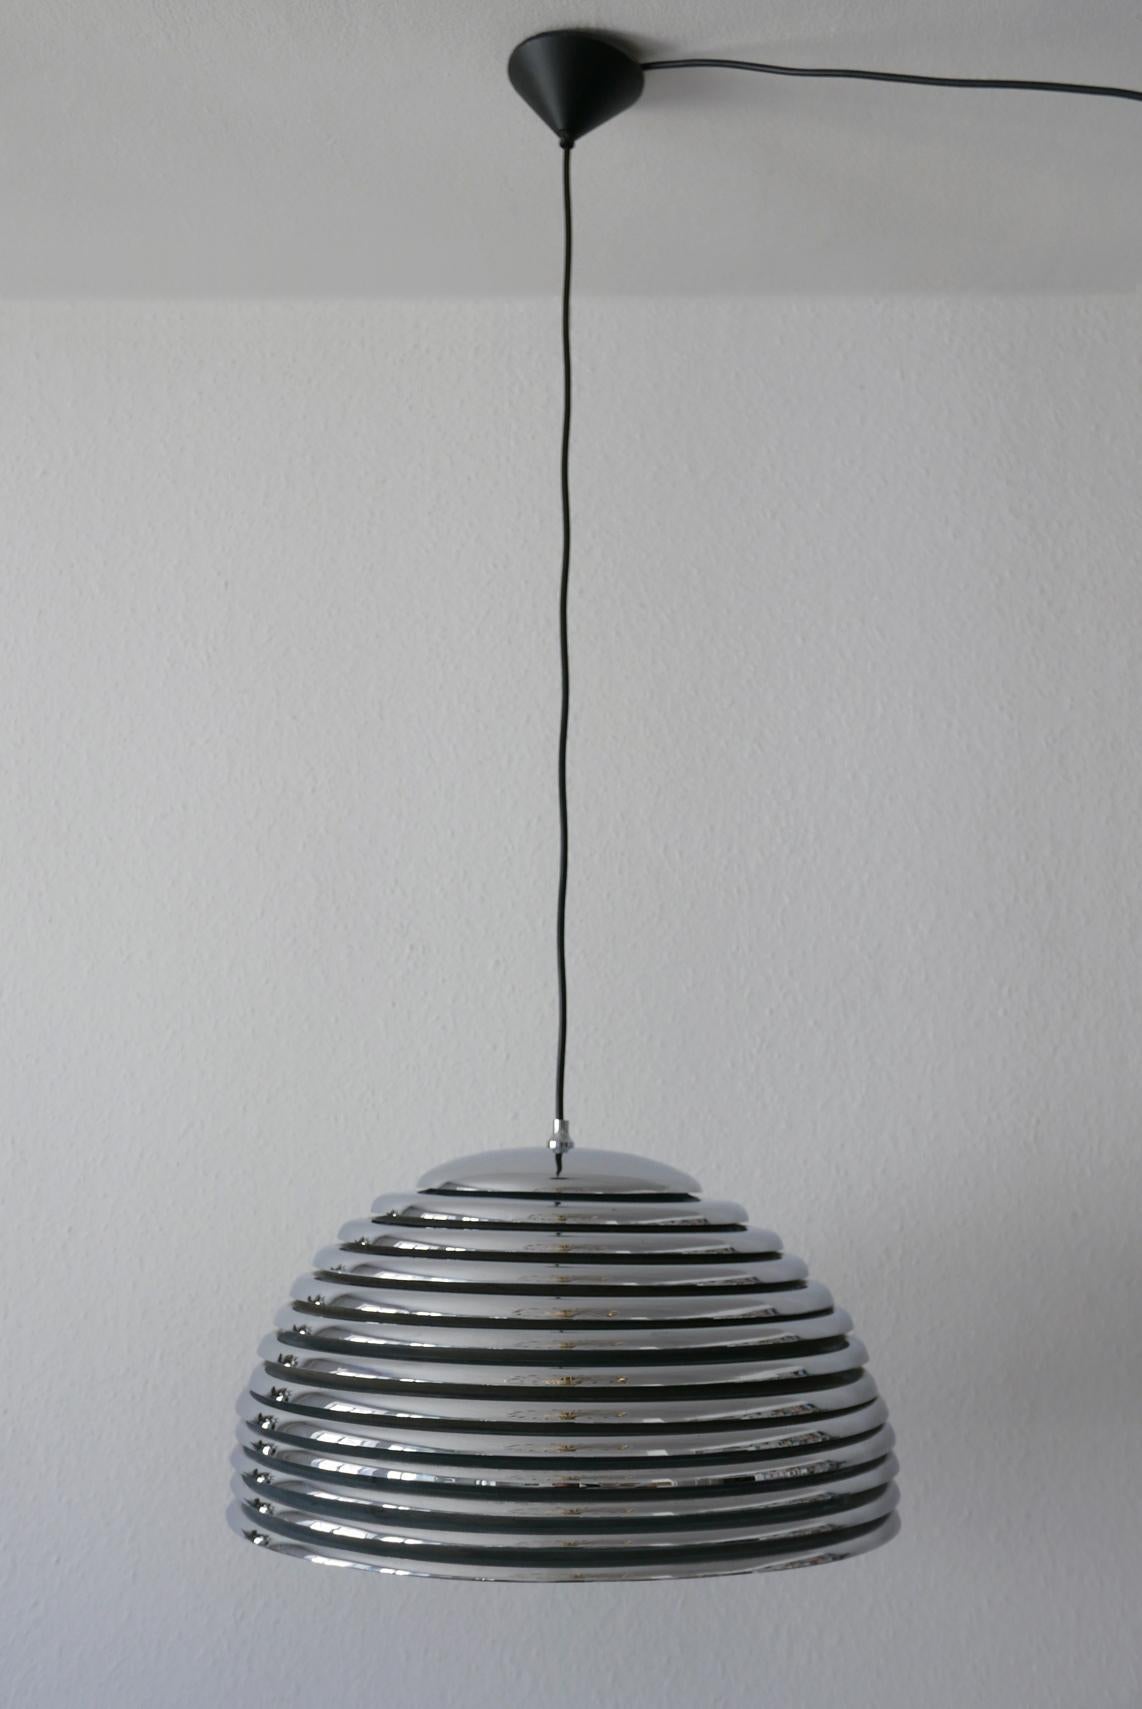 Elegant and large Mid-Century Modern 'Saturno' pendant lamp by Kazuo Motozawa for staff, 1960s, Germany. IF design awarded in 1972.

Executed in chrome-plated metal. It needs 4 x E27 Edison screw fit bulbs. It runs both on 110 / 230 volt.

Our